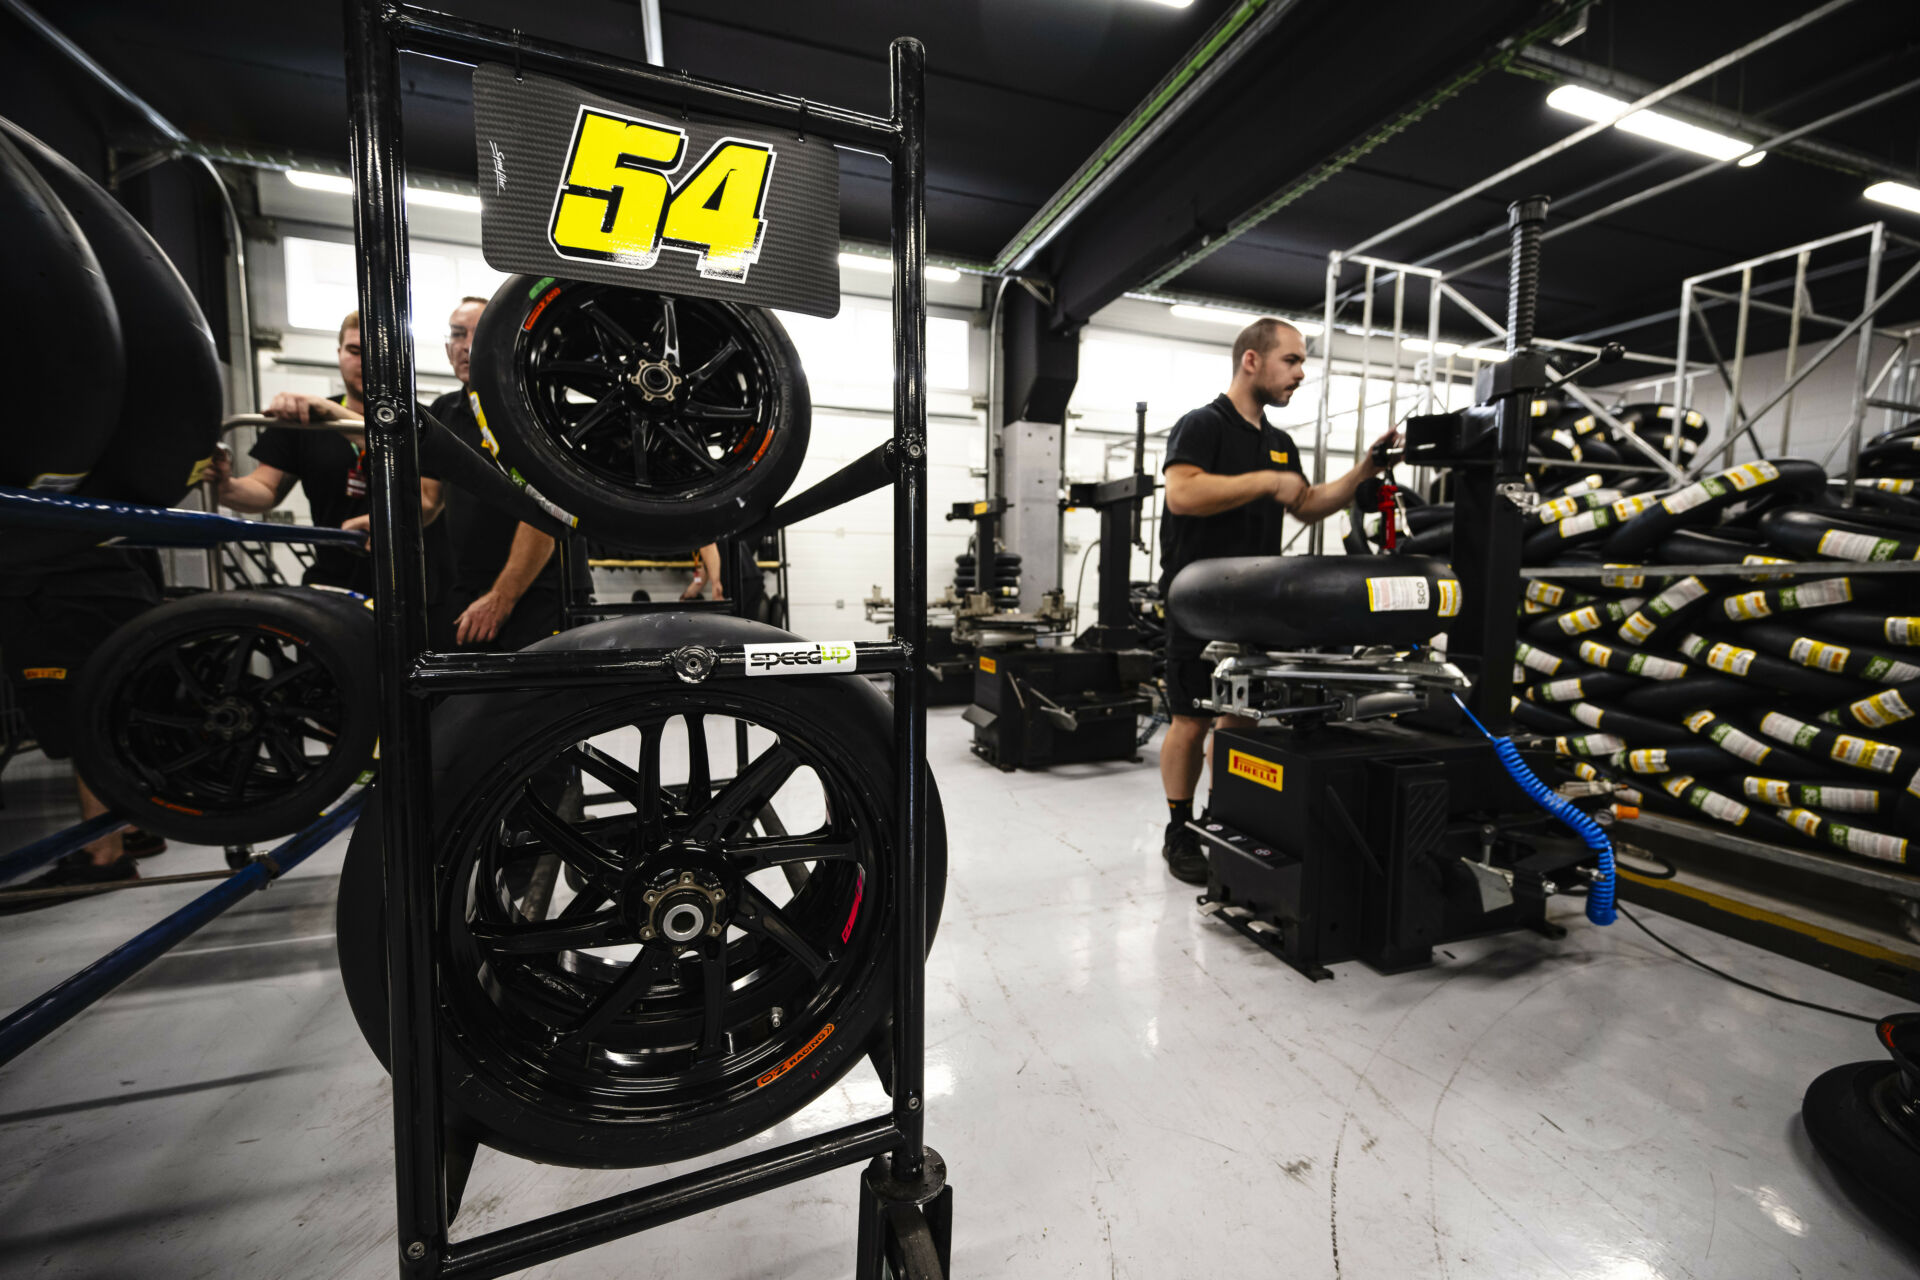 Pirelli tires being fitted during a test Monday at Circuit de Barcelona-Catalunya. Photo courtesy Pirelli.